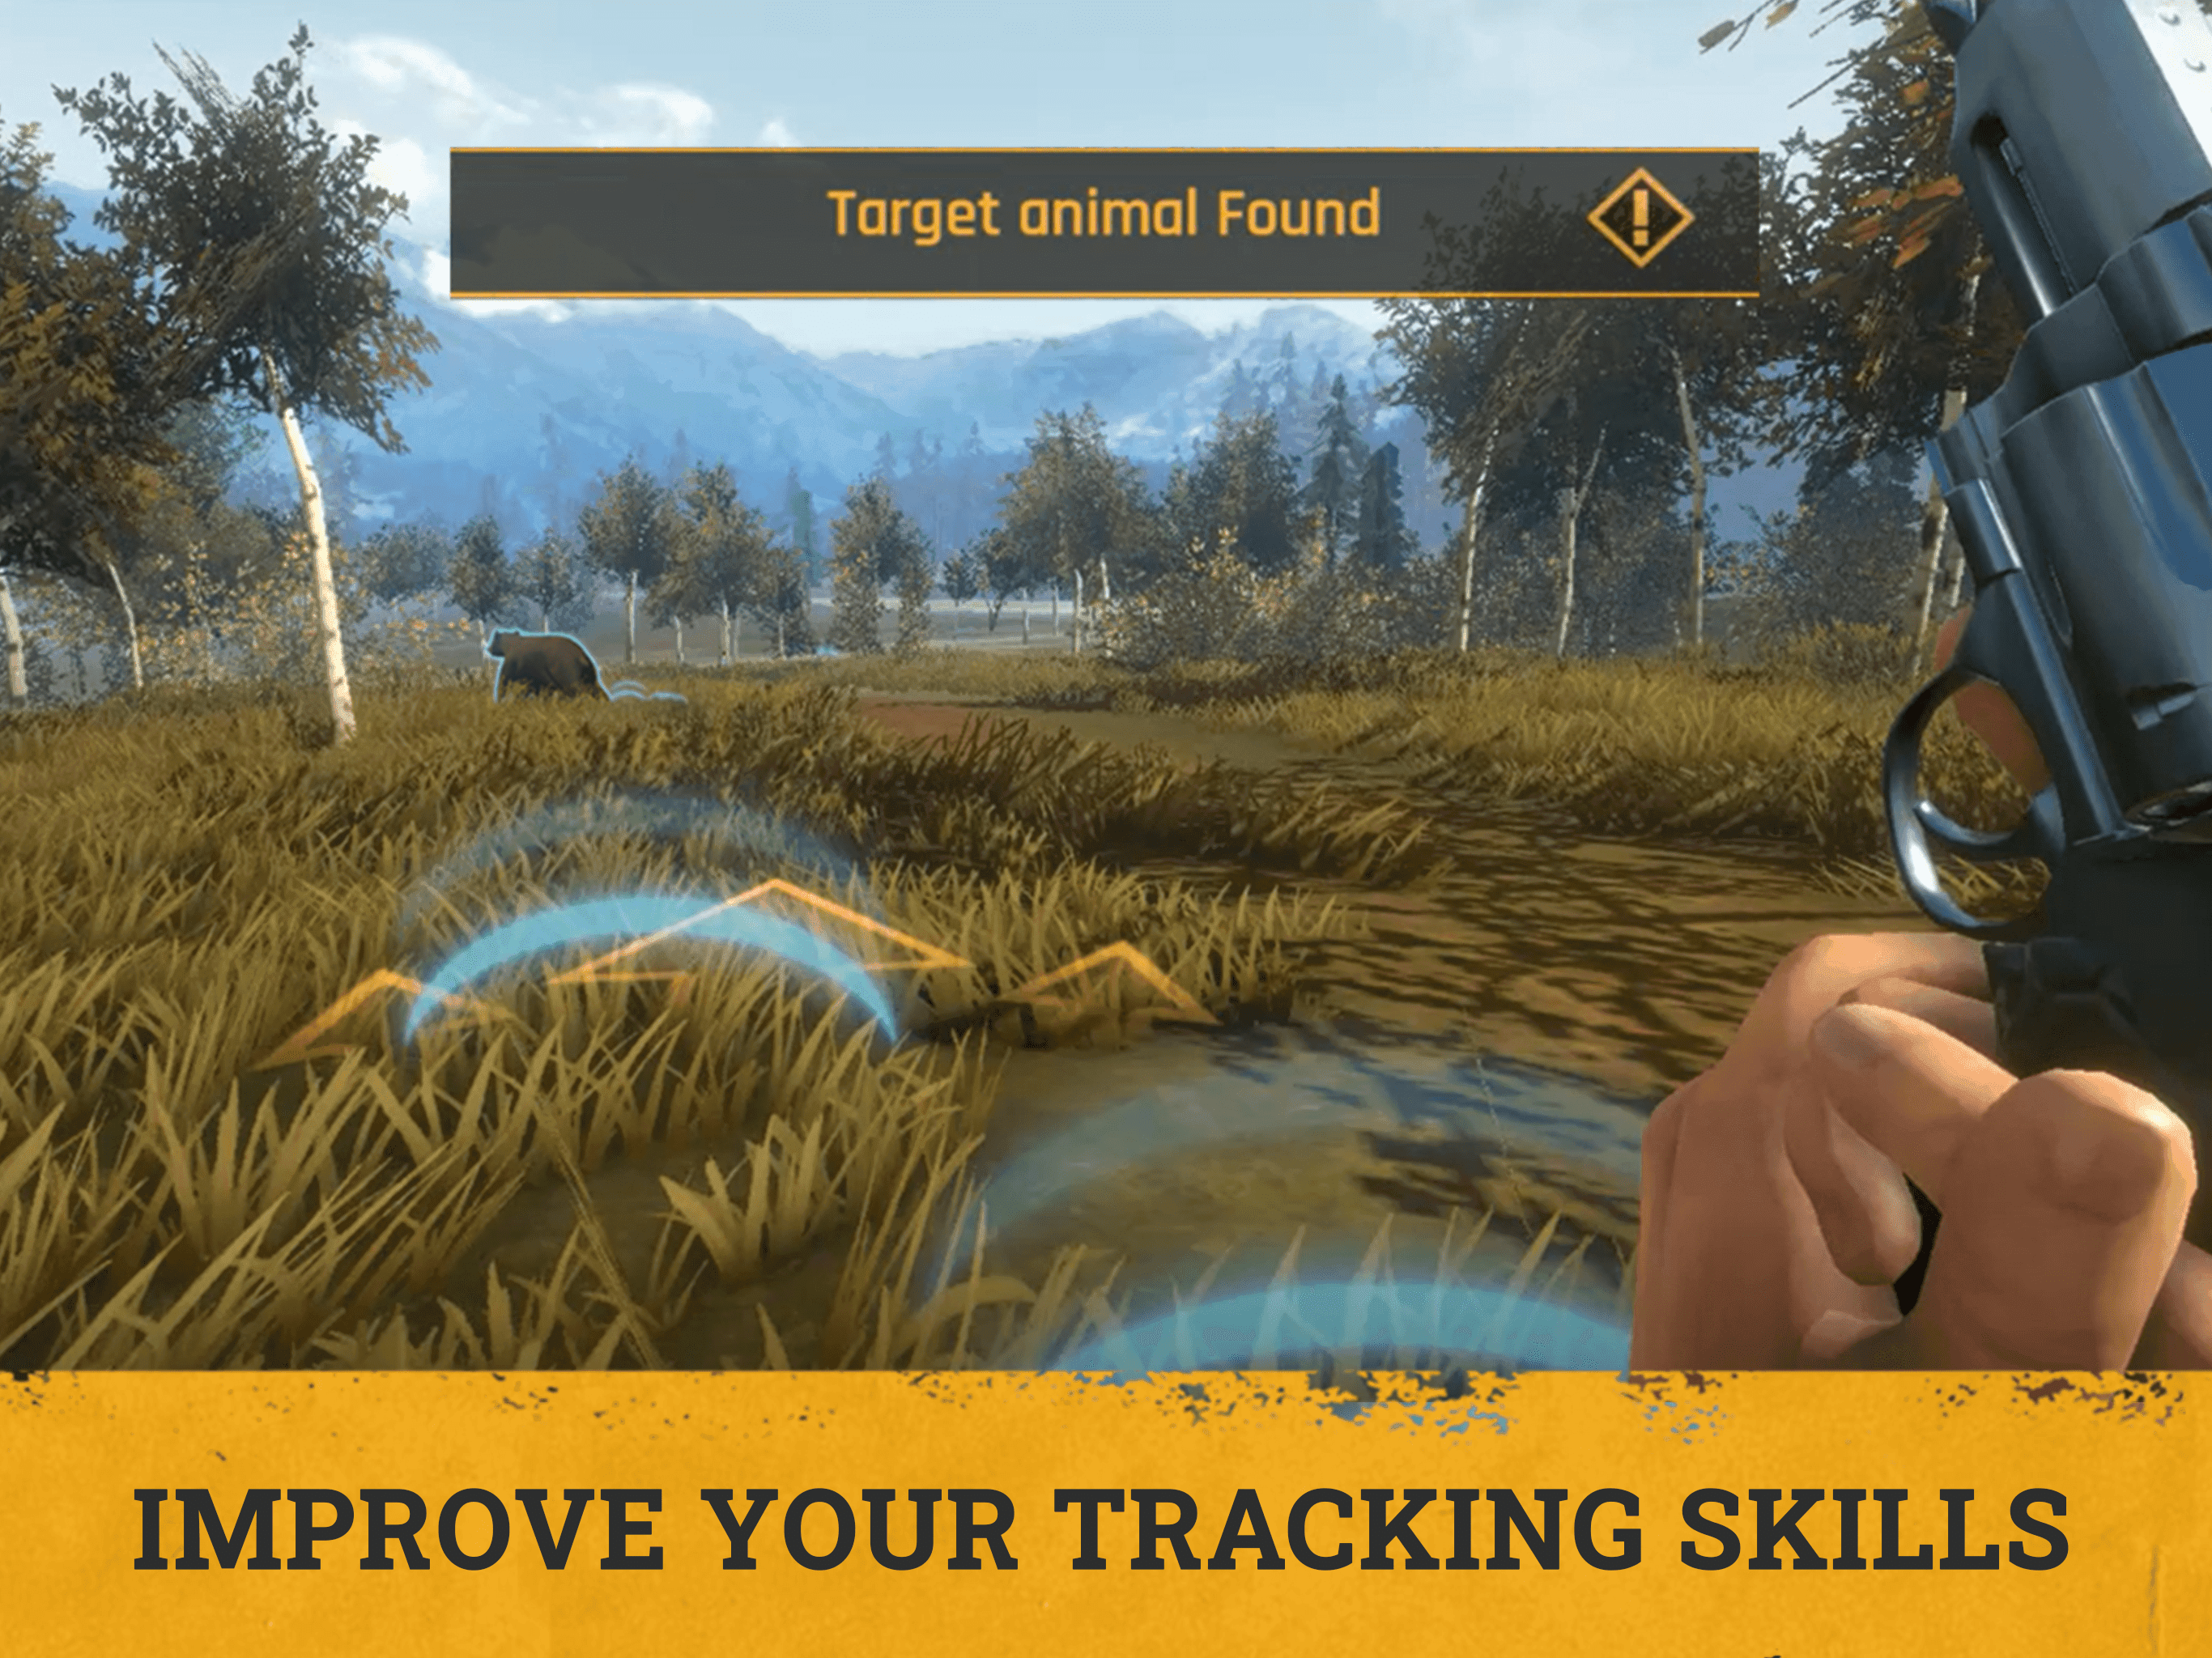 The Hunter: Call of the Wild™ android iOS pre-register-TapTap